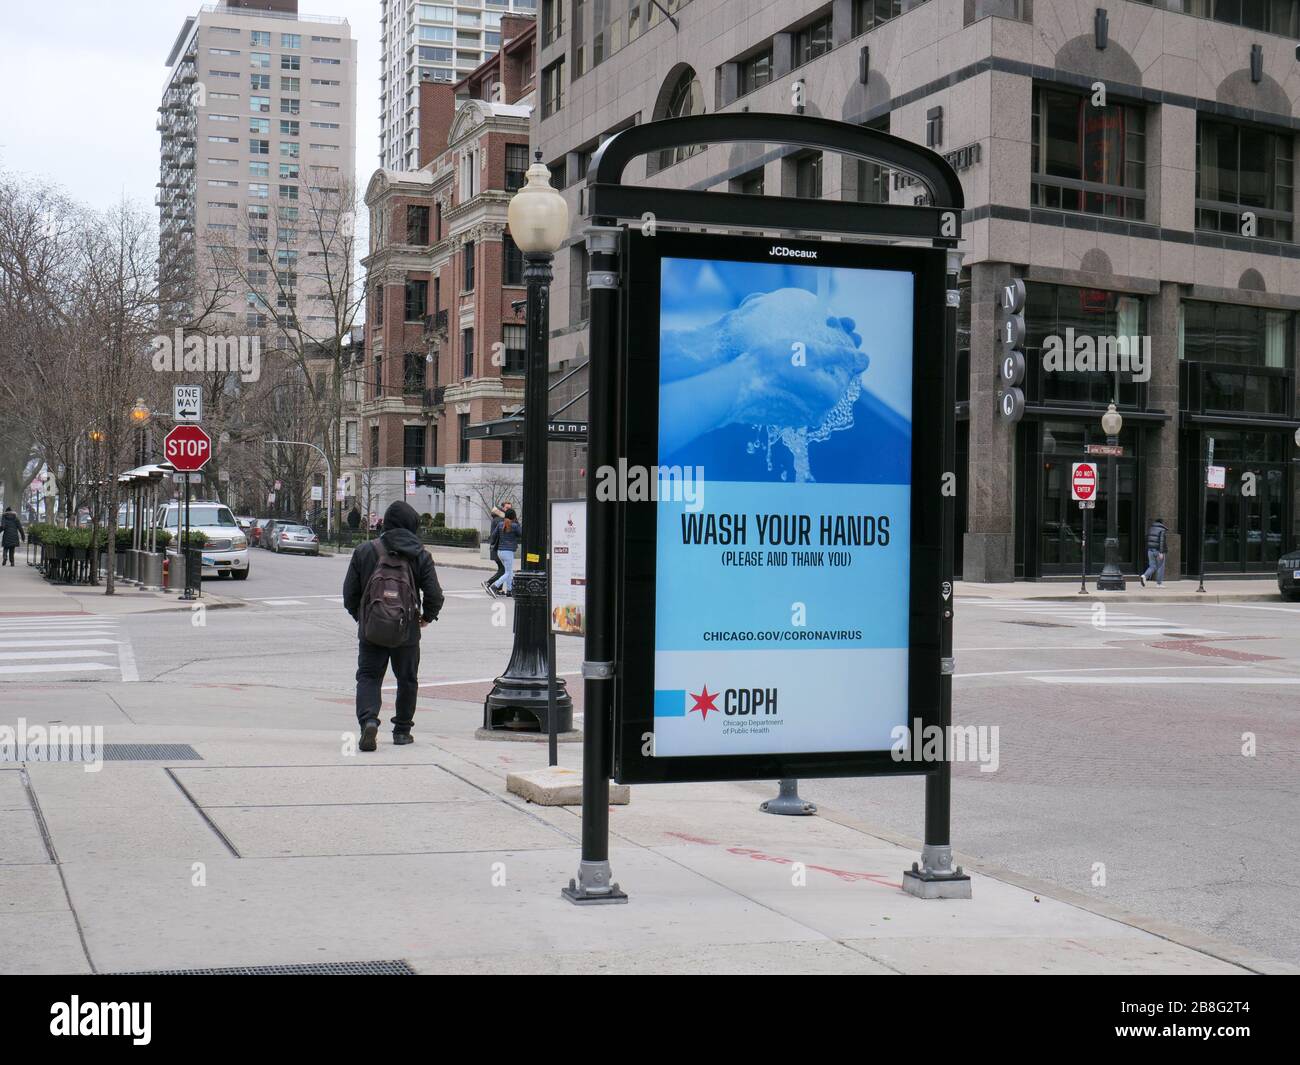 Chicago, Illinois, USA. 21st March, 2020. An electonic sign in the Rush Street neighborhood urges people to wash their hands as a precaution against COVID-19. Governor Pritzker has issued a stay at home order effective at 5pm local time today. Stock Photo